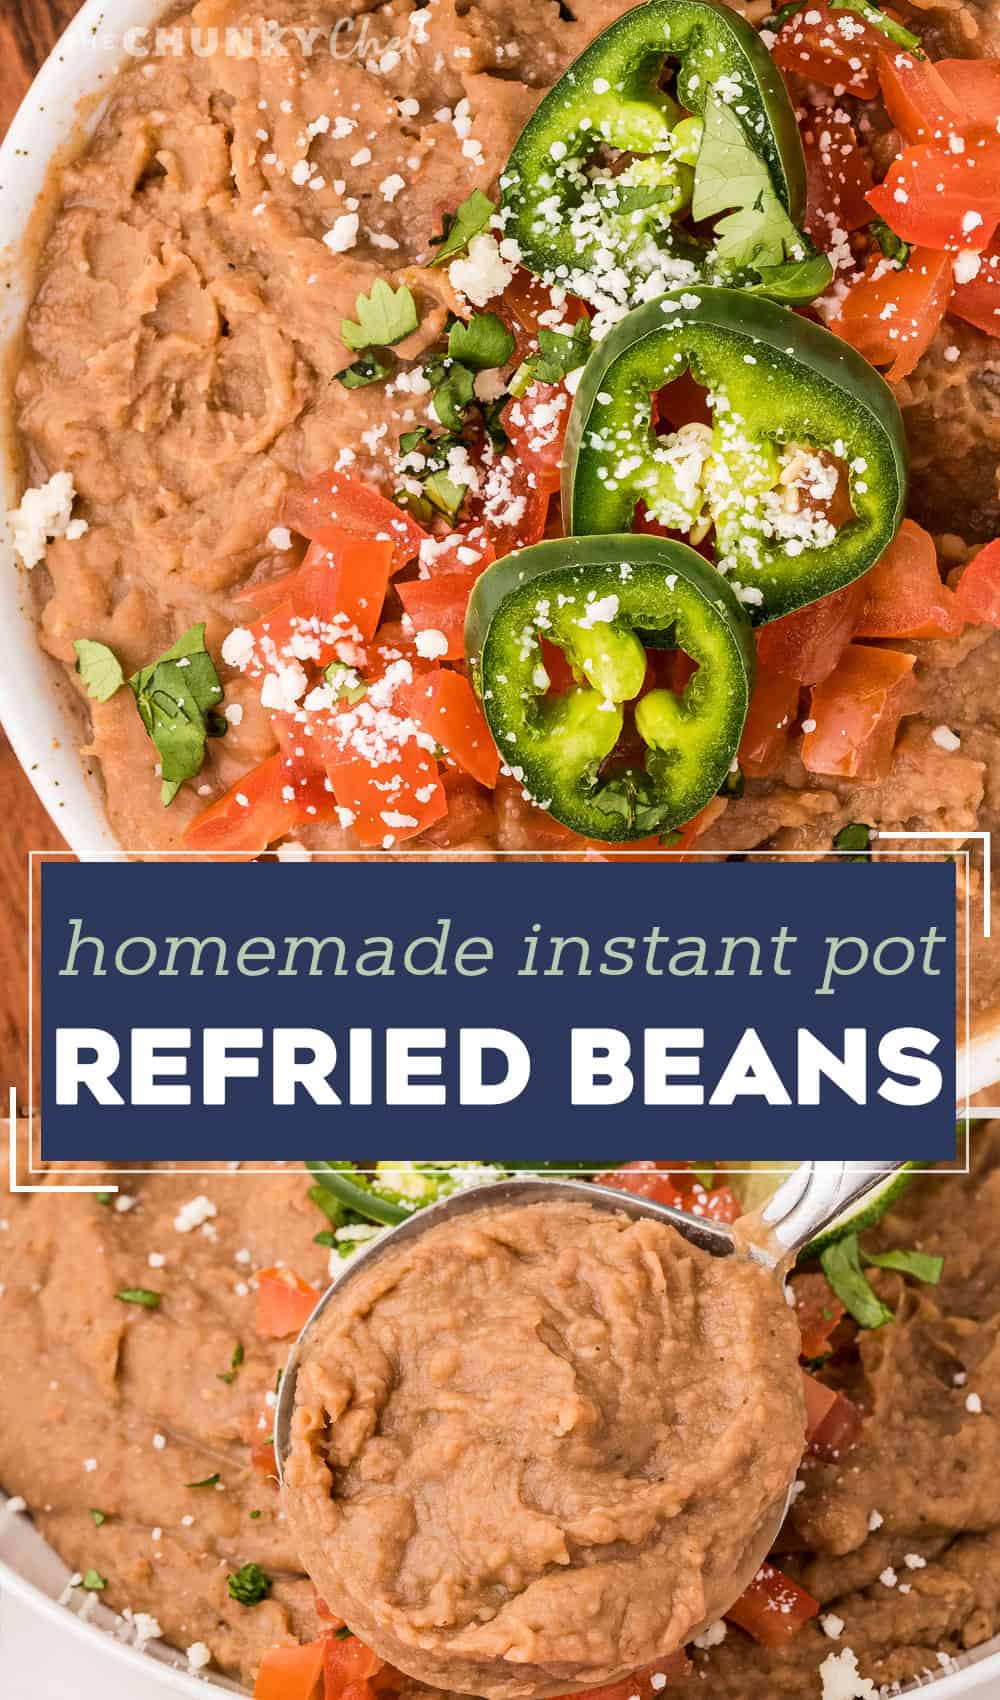 Instant Pot Refried Beans (no soaking!) - The Chunky Chef